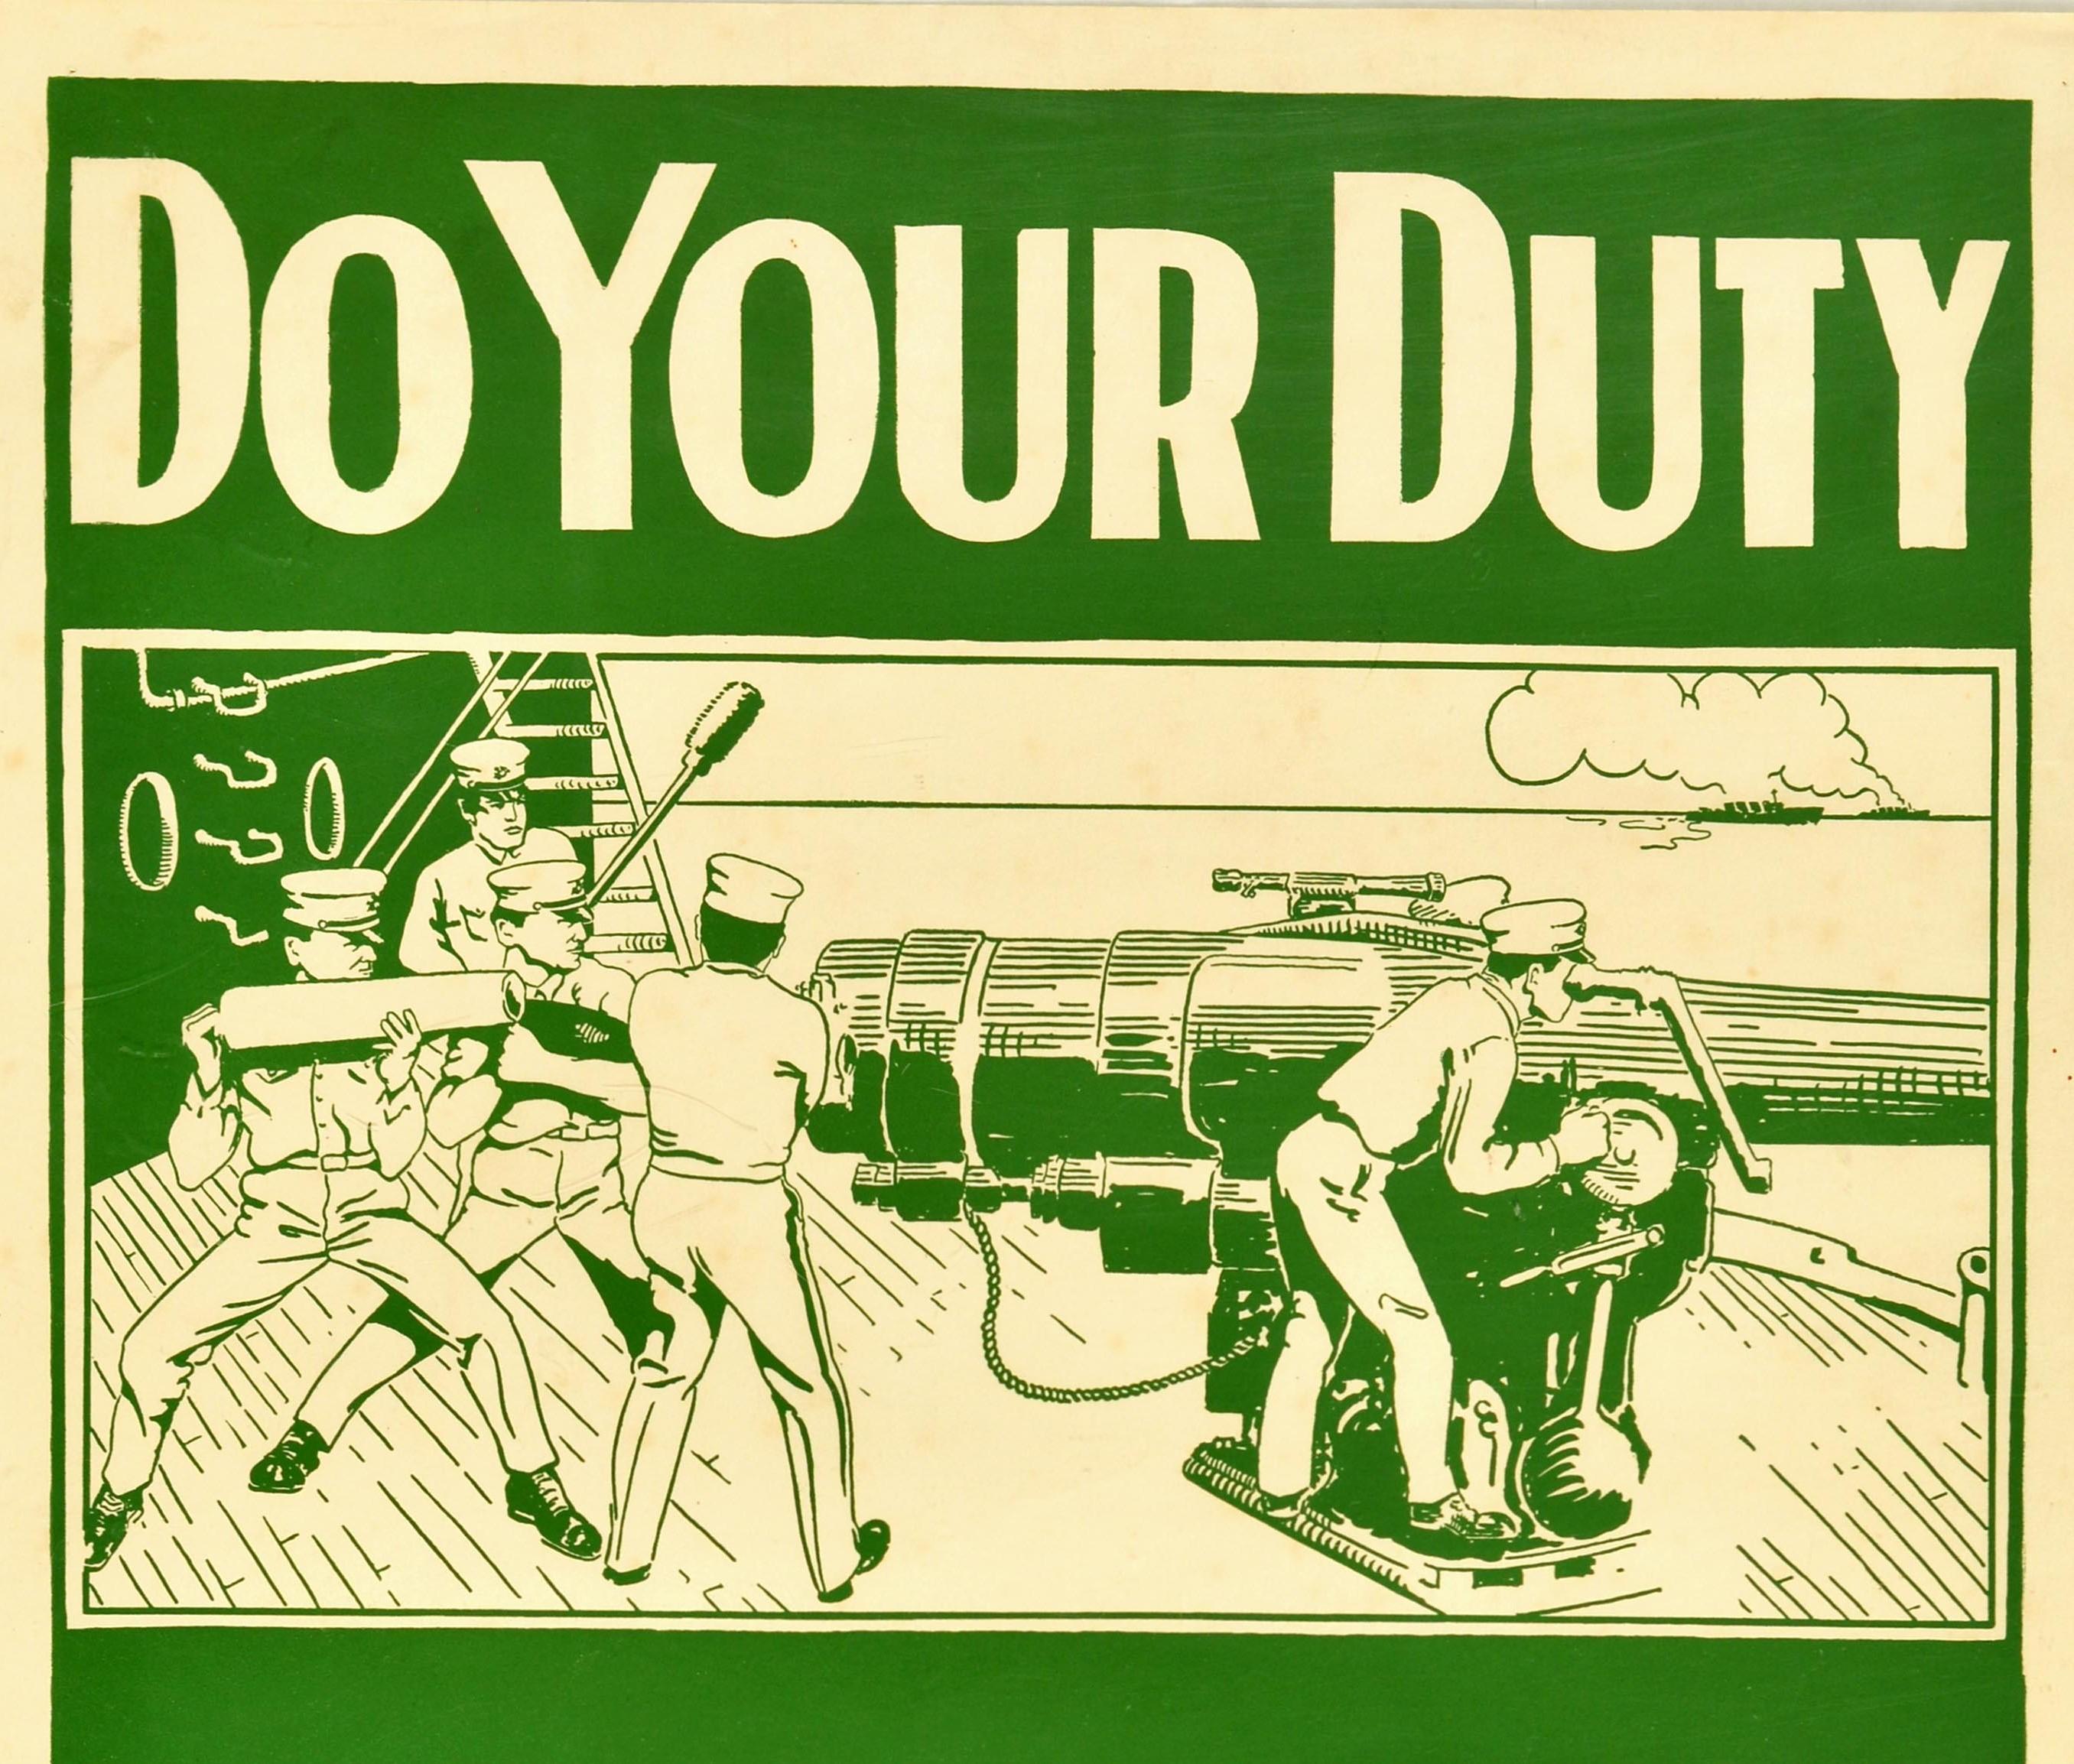 Original antique World War One military recruitment poster - Do Your Duty Join the U.S. Marines Help them defend America on Land and Sea Apply at 429 Custom House Building Baltimore MD - featuring artwork in green and white depicting a scene on